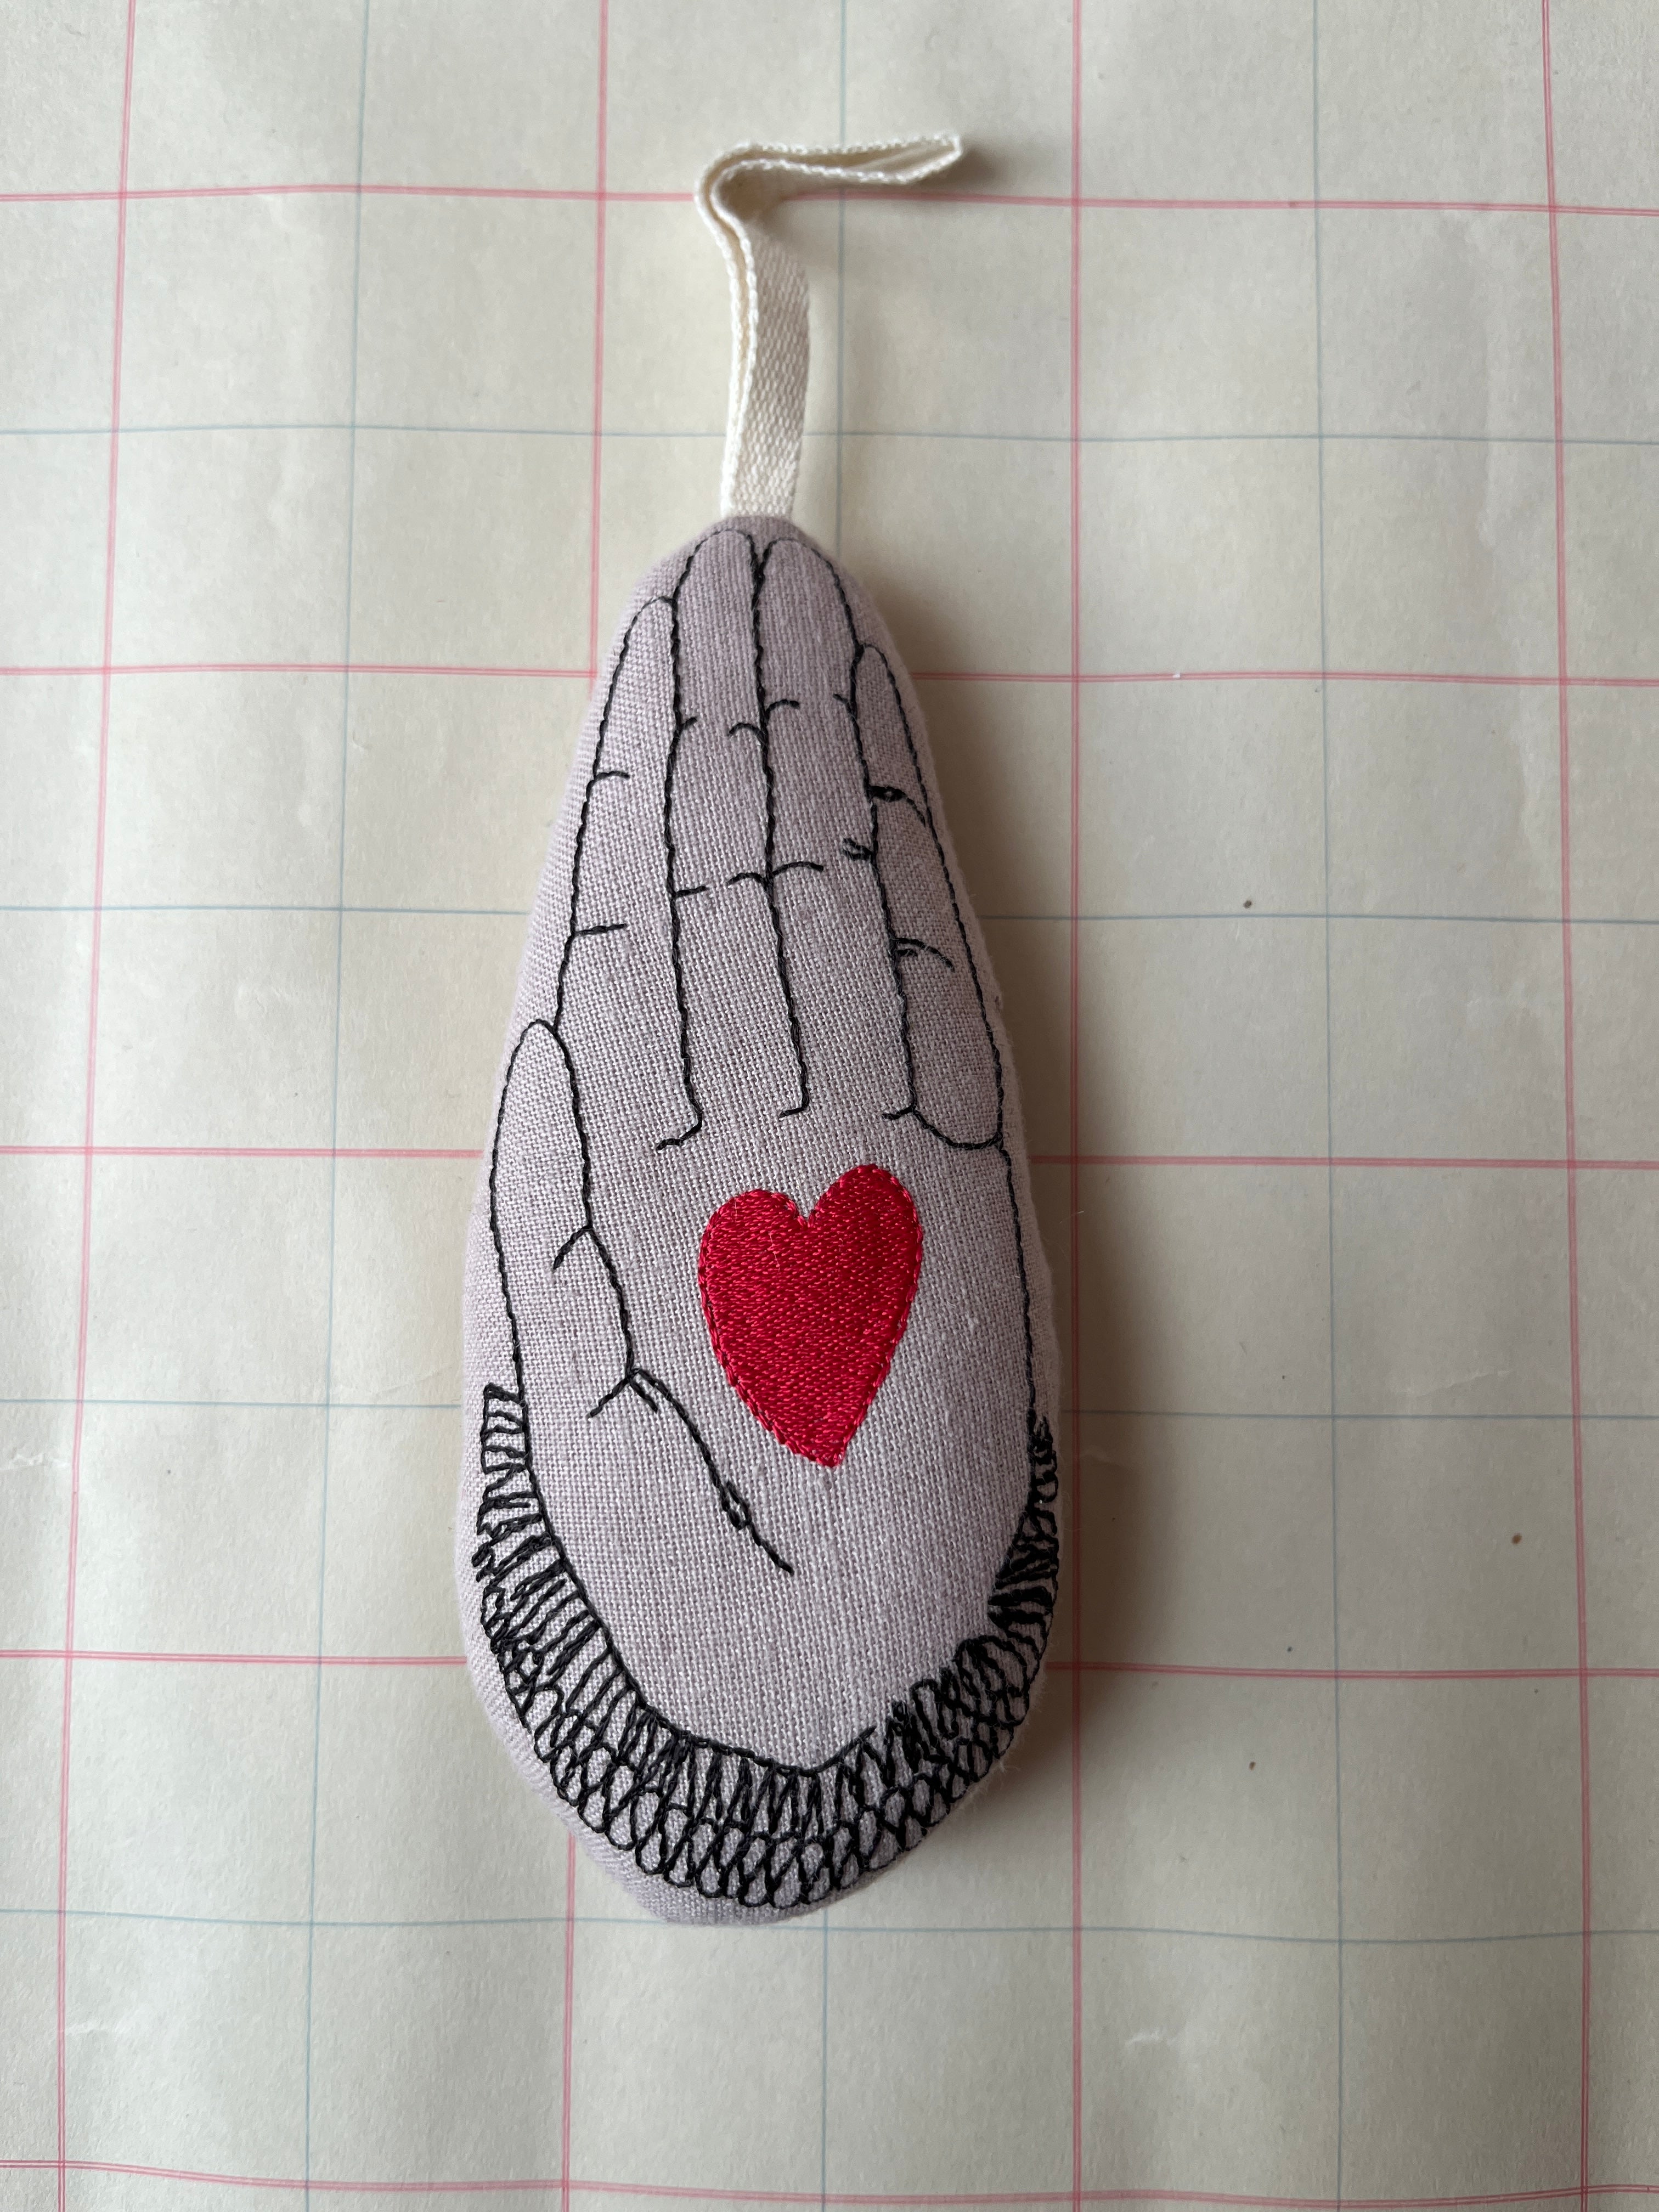 Hand in Heart Ornament by Skippy Cotton